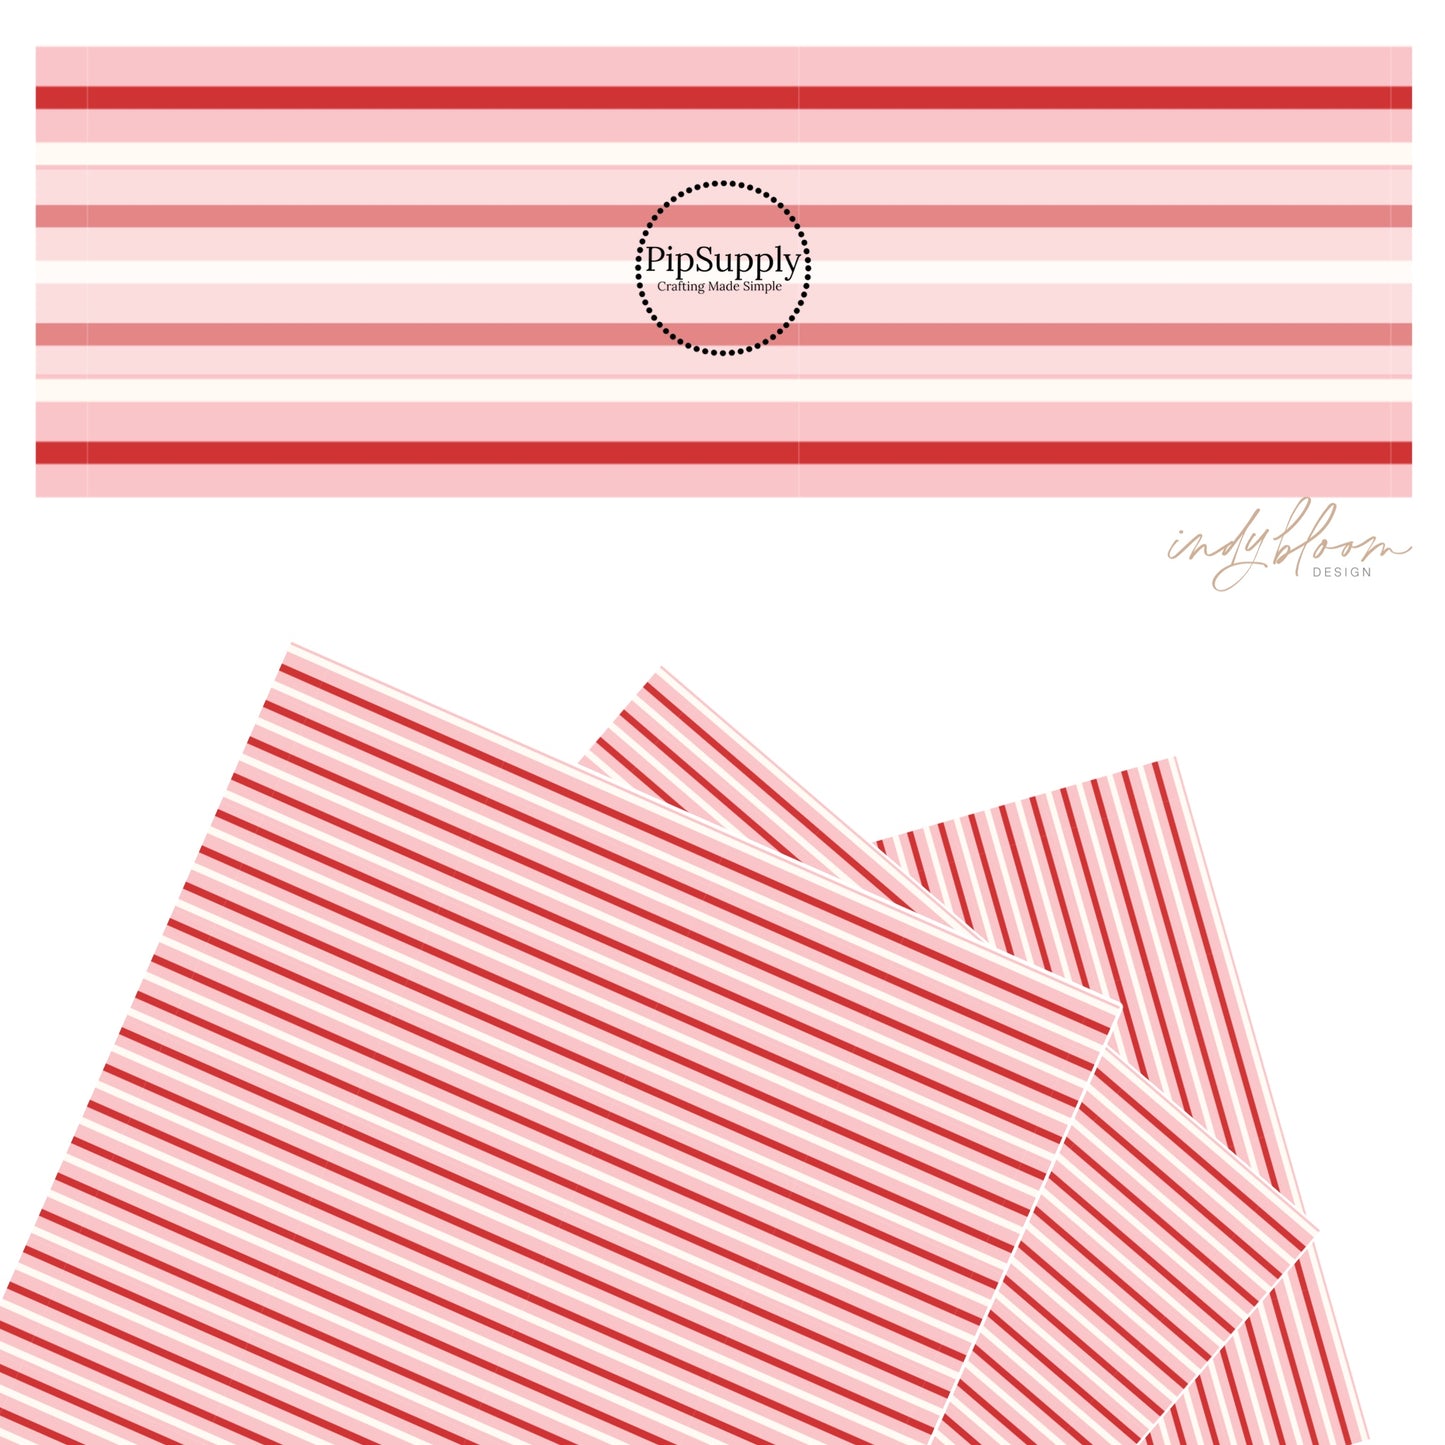 These Valentine's pattern themed faux leather sheets contain the following design elements: rows of cream and red strips on peachy pink. Our CPSIA compliant faux leather sheets or rolls can be used for all types of crafting projects.